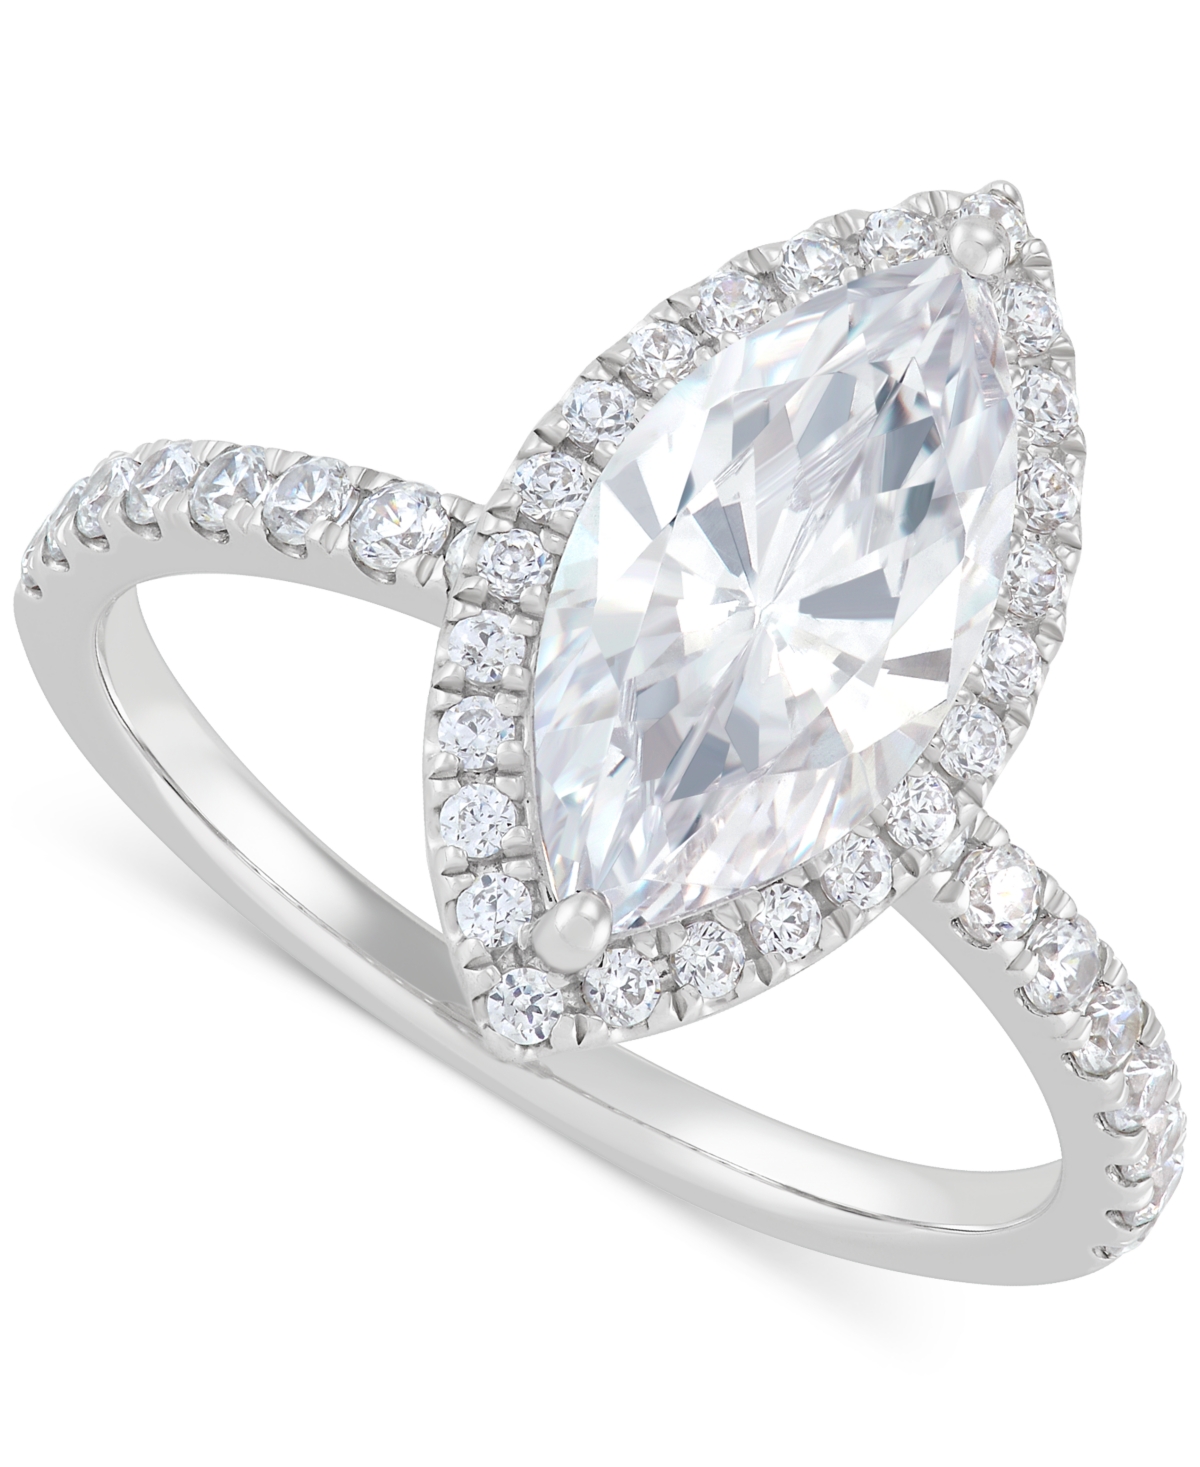 Igi Certified Lab Grown Diamond Marquise Halo Engagement Ring (2-1/2 ct. t.w.) in 14K White Gold - White Gold